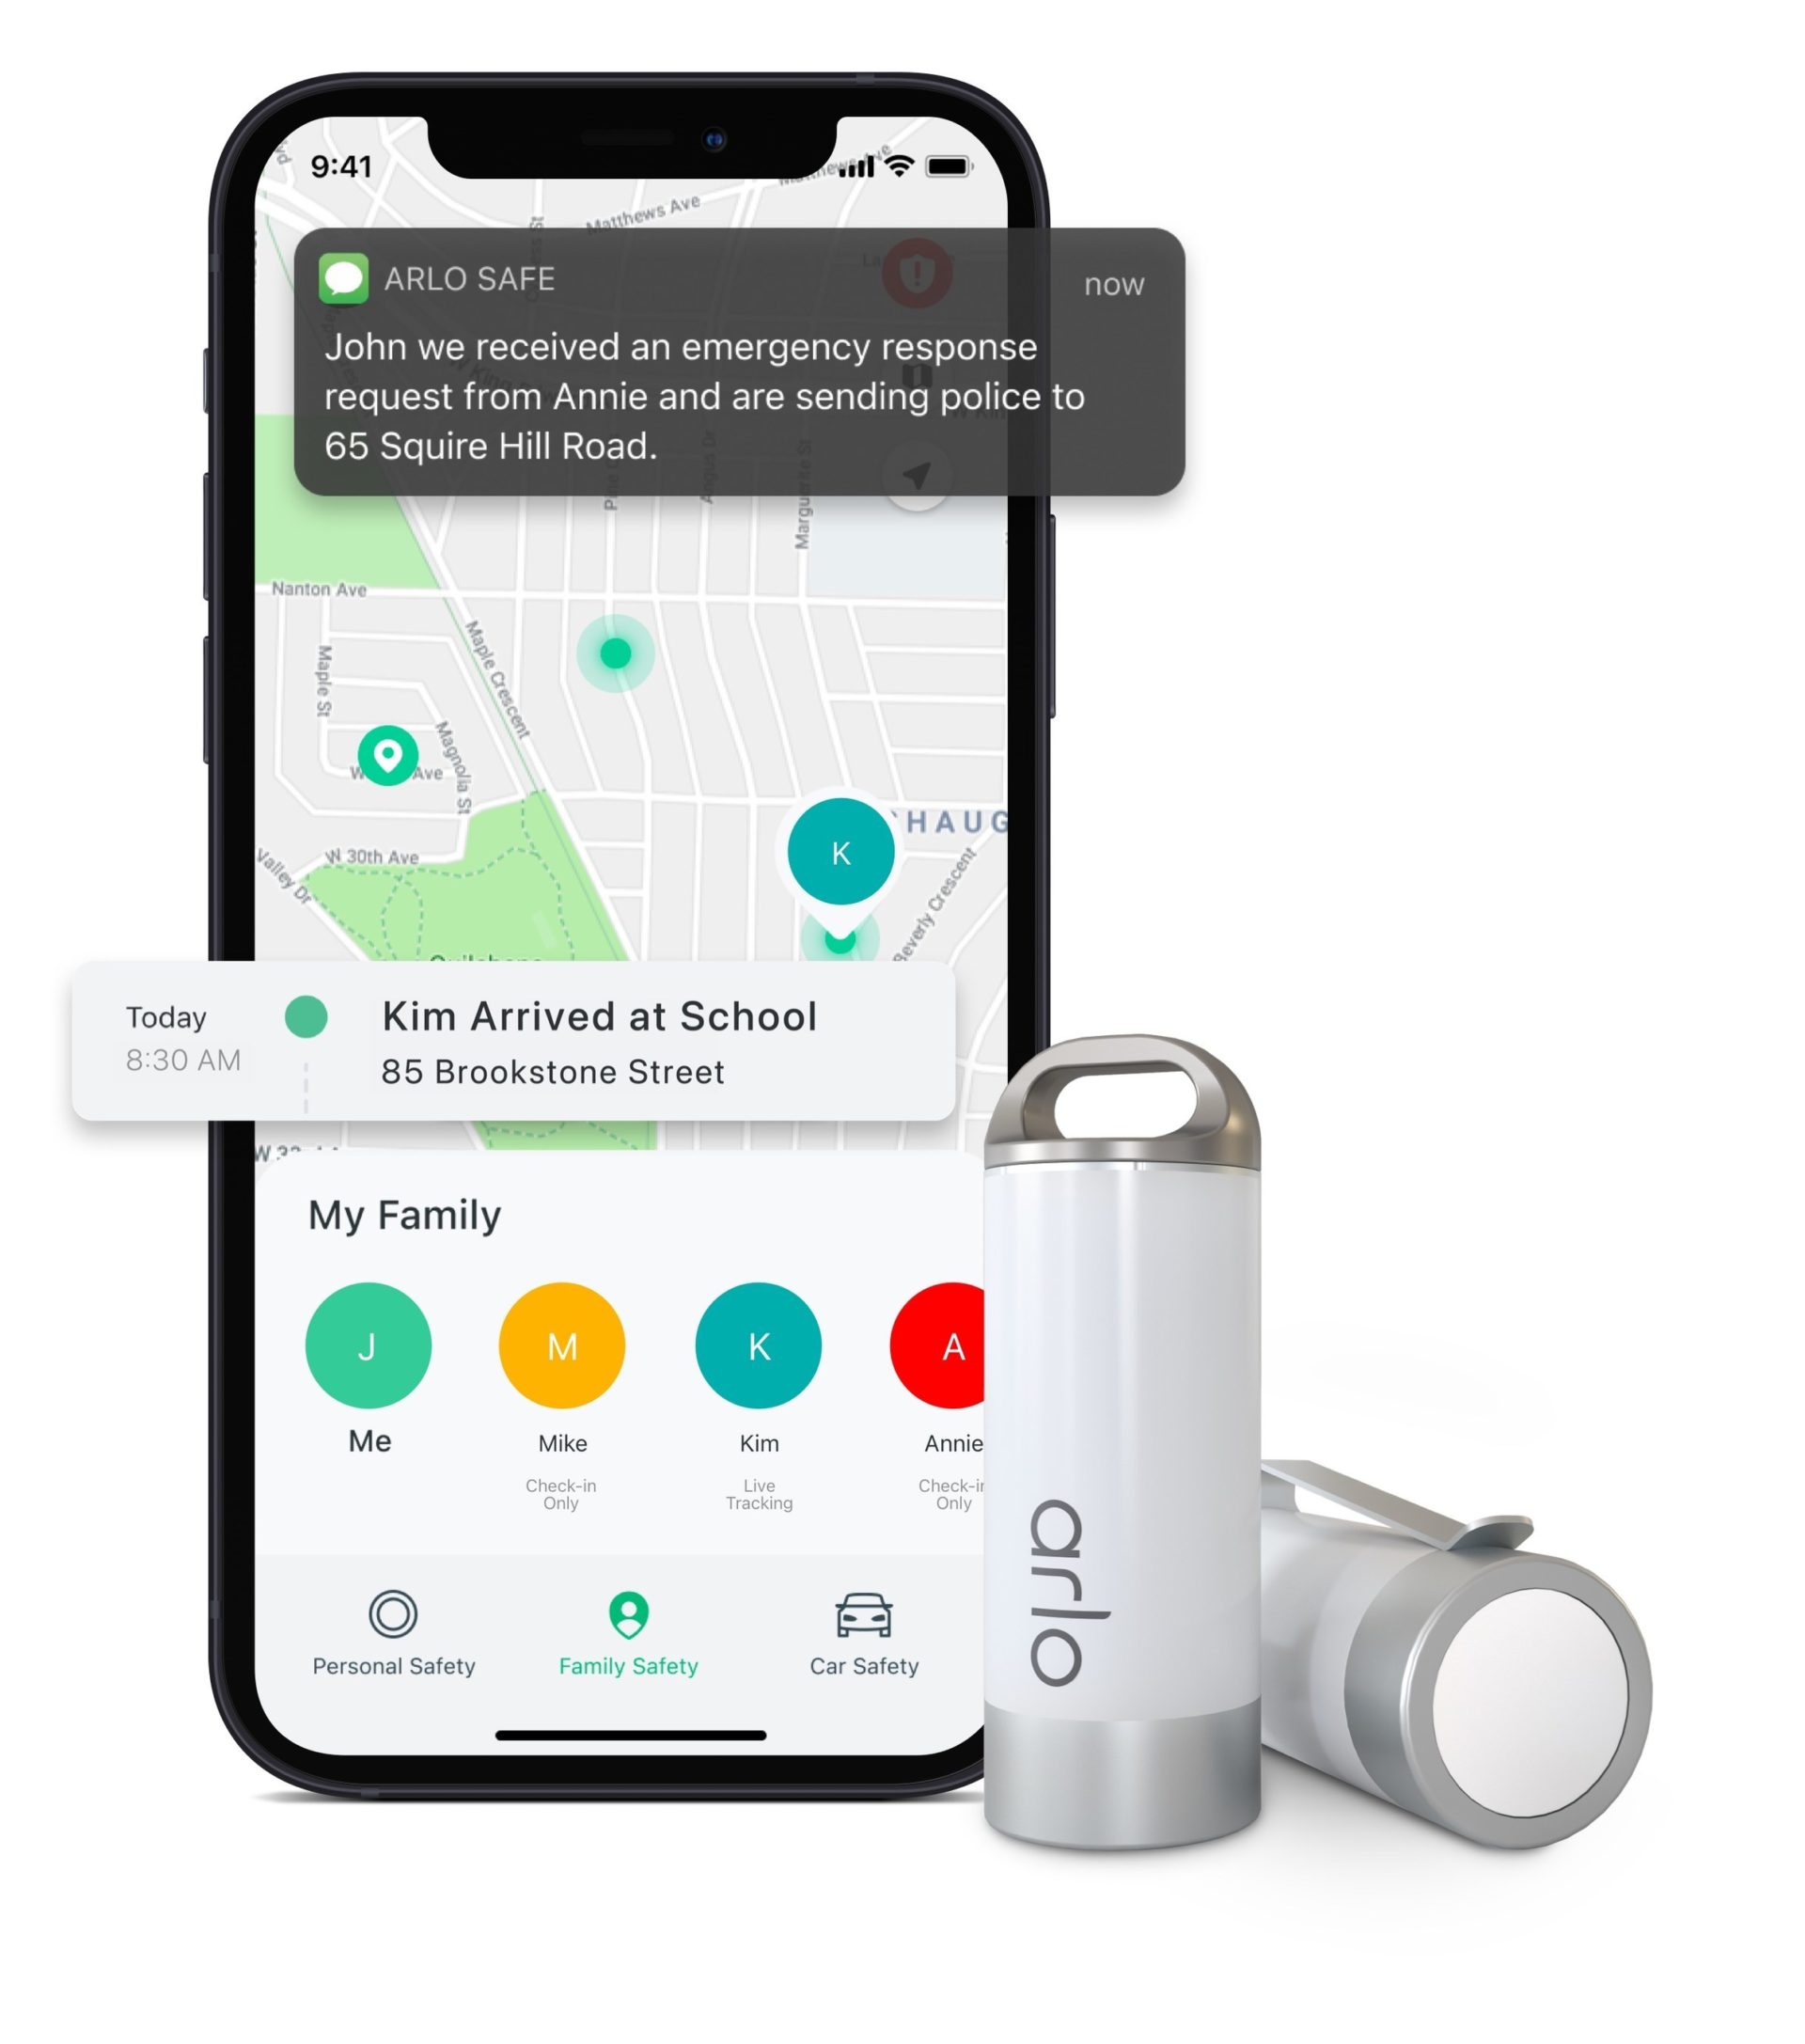 Arlo steps sideways into personal security options